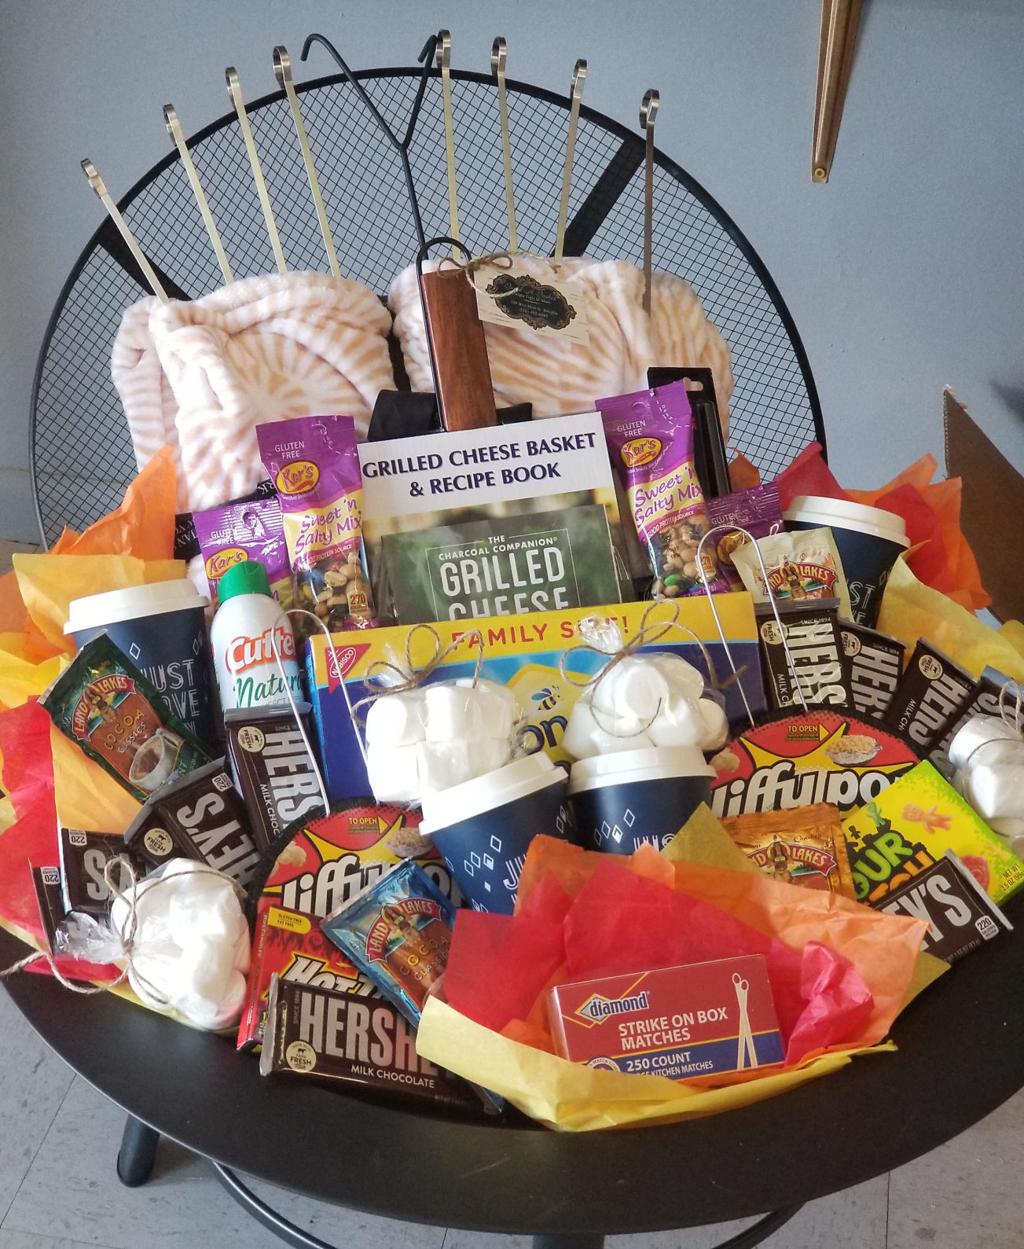 Offers Customized Gift Baskets, Fire Pit Gift Basket Ideas